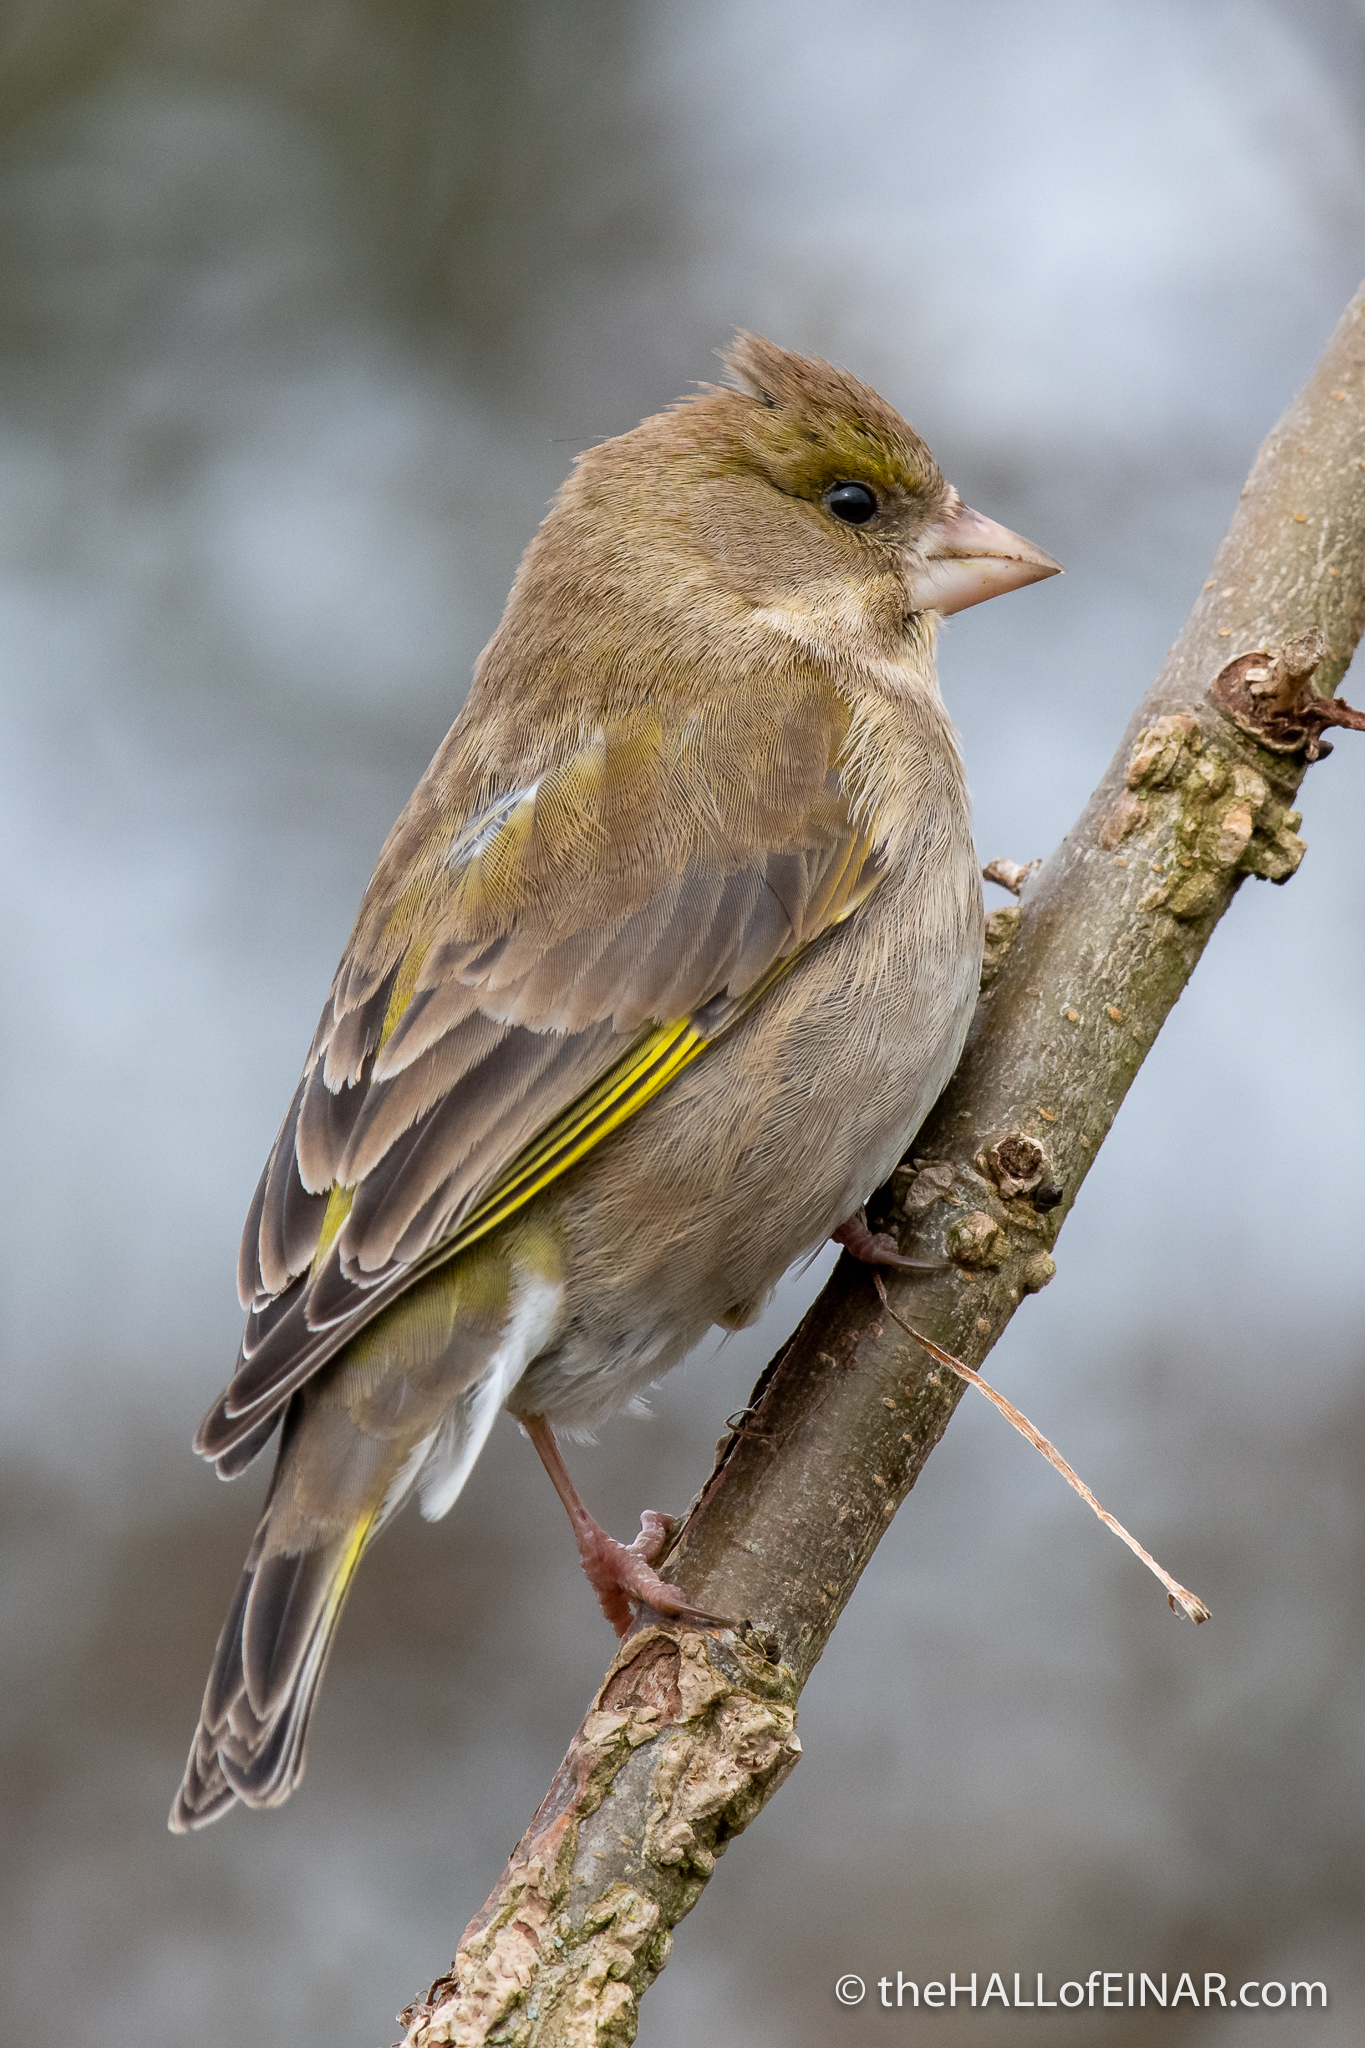 Greenfinch - Seaton - The Hall of Einar - photograph (c) David Bailey (not the)